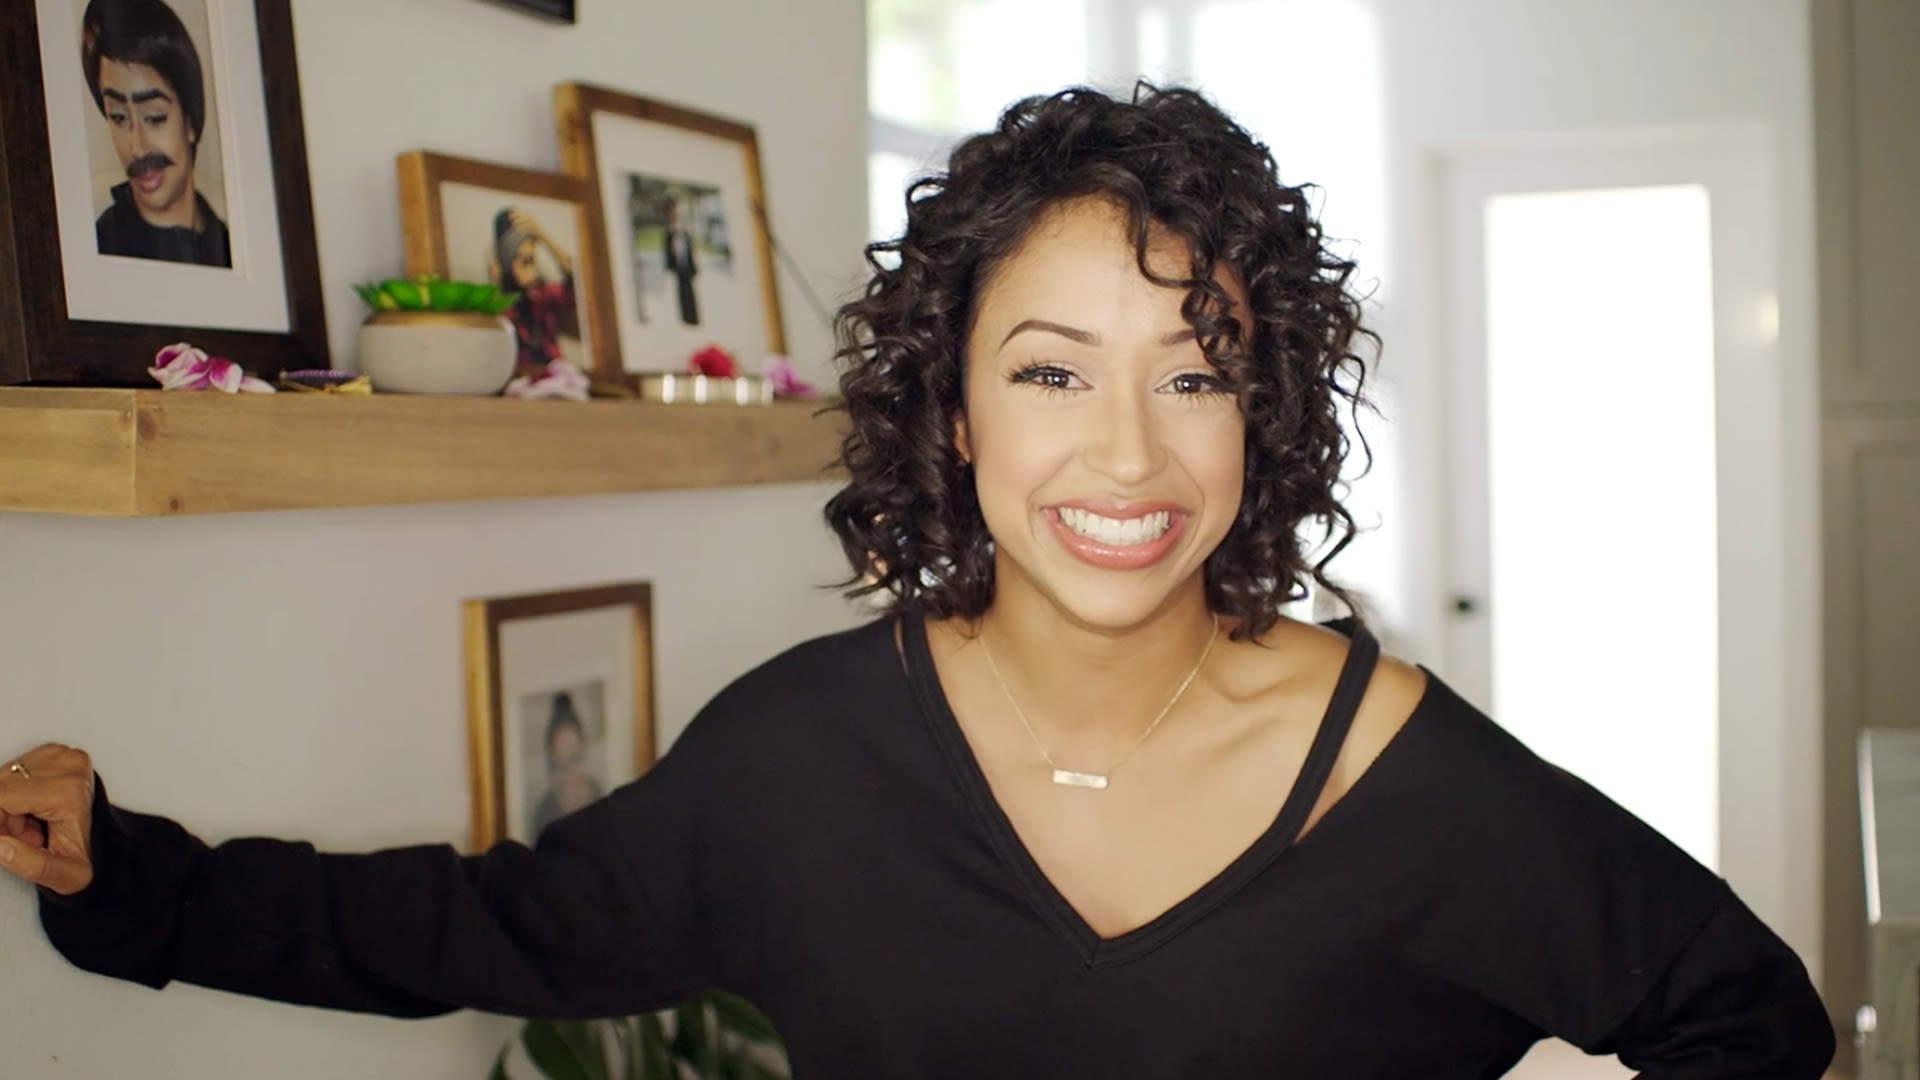 Watch Liza Koshy on YouTube Fame, Her Alter Egos, and Her Houston